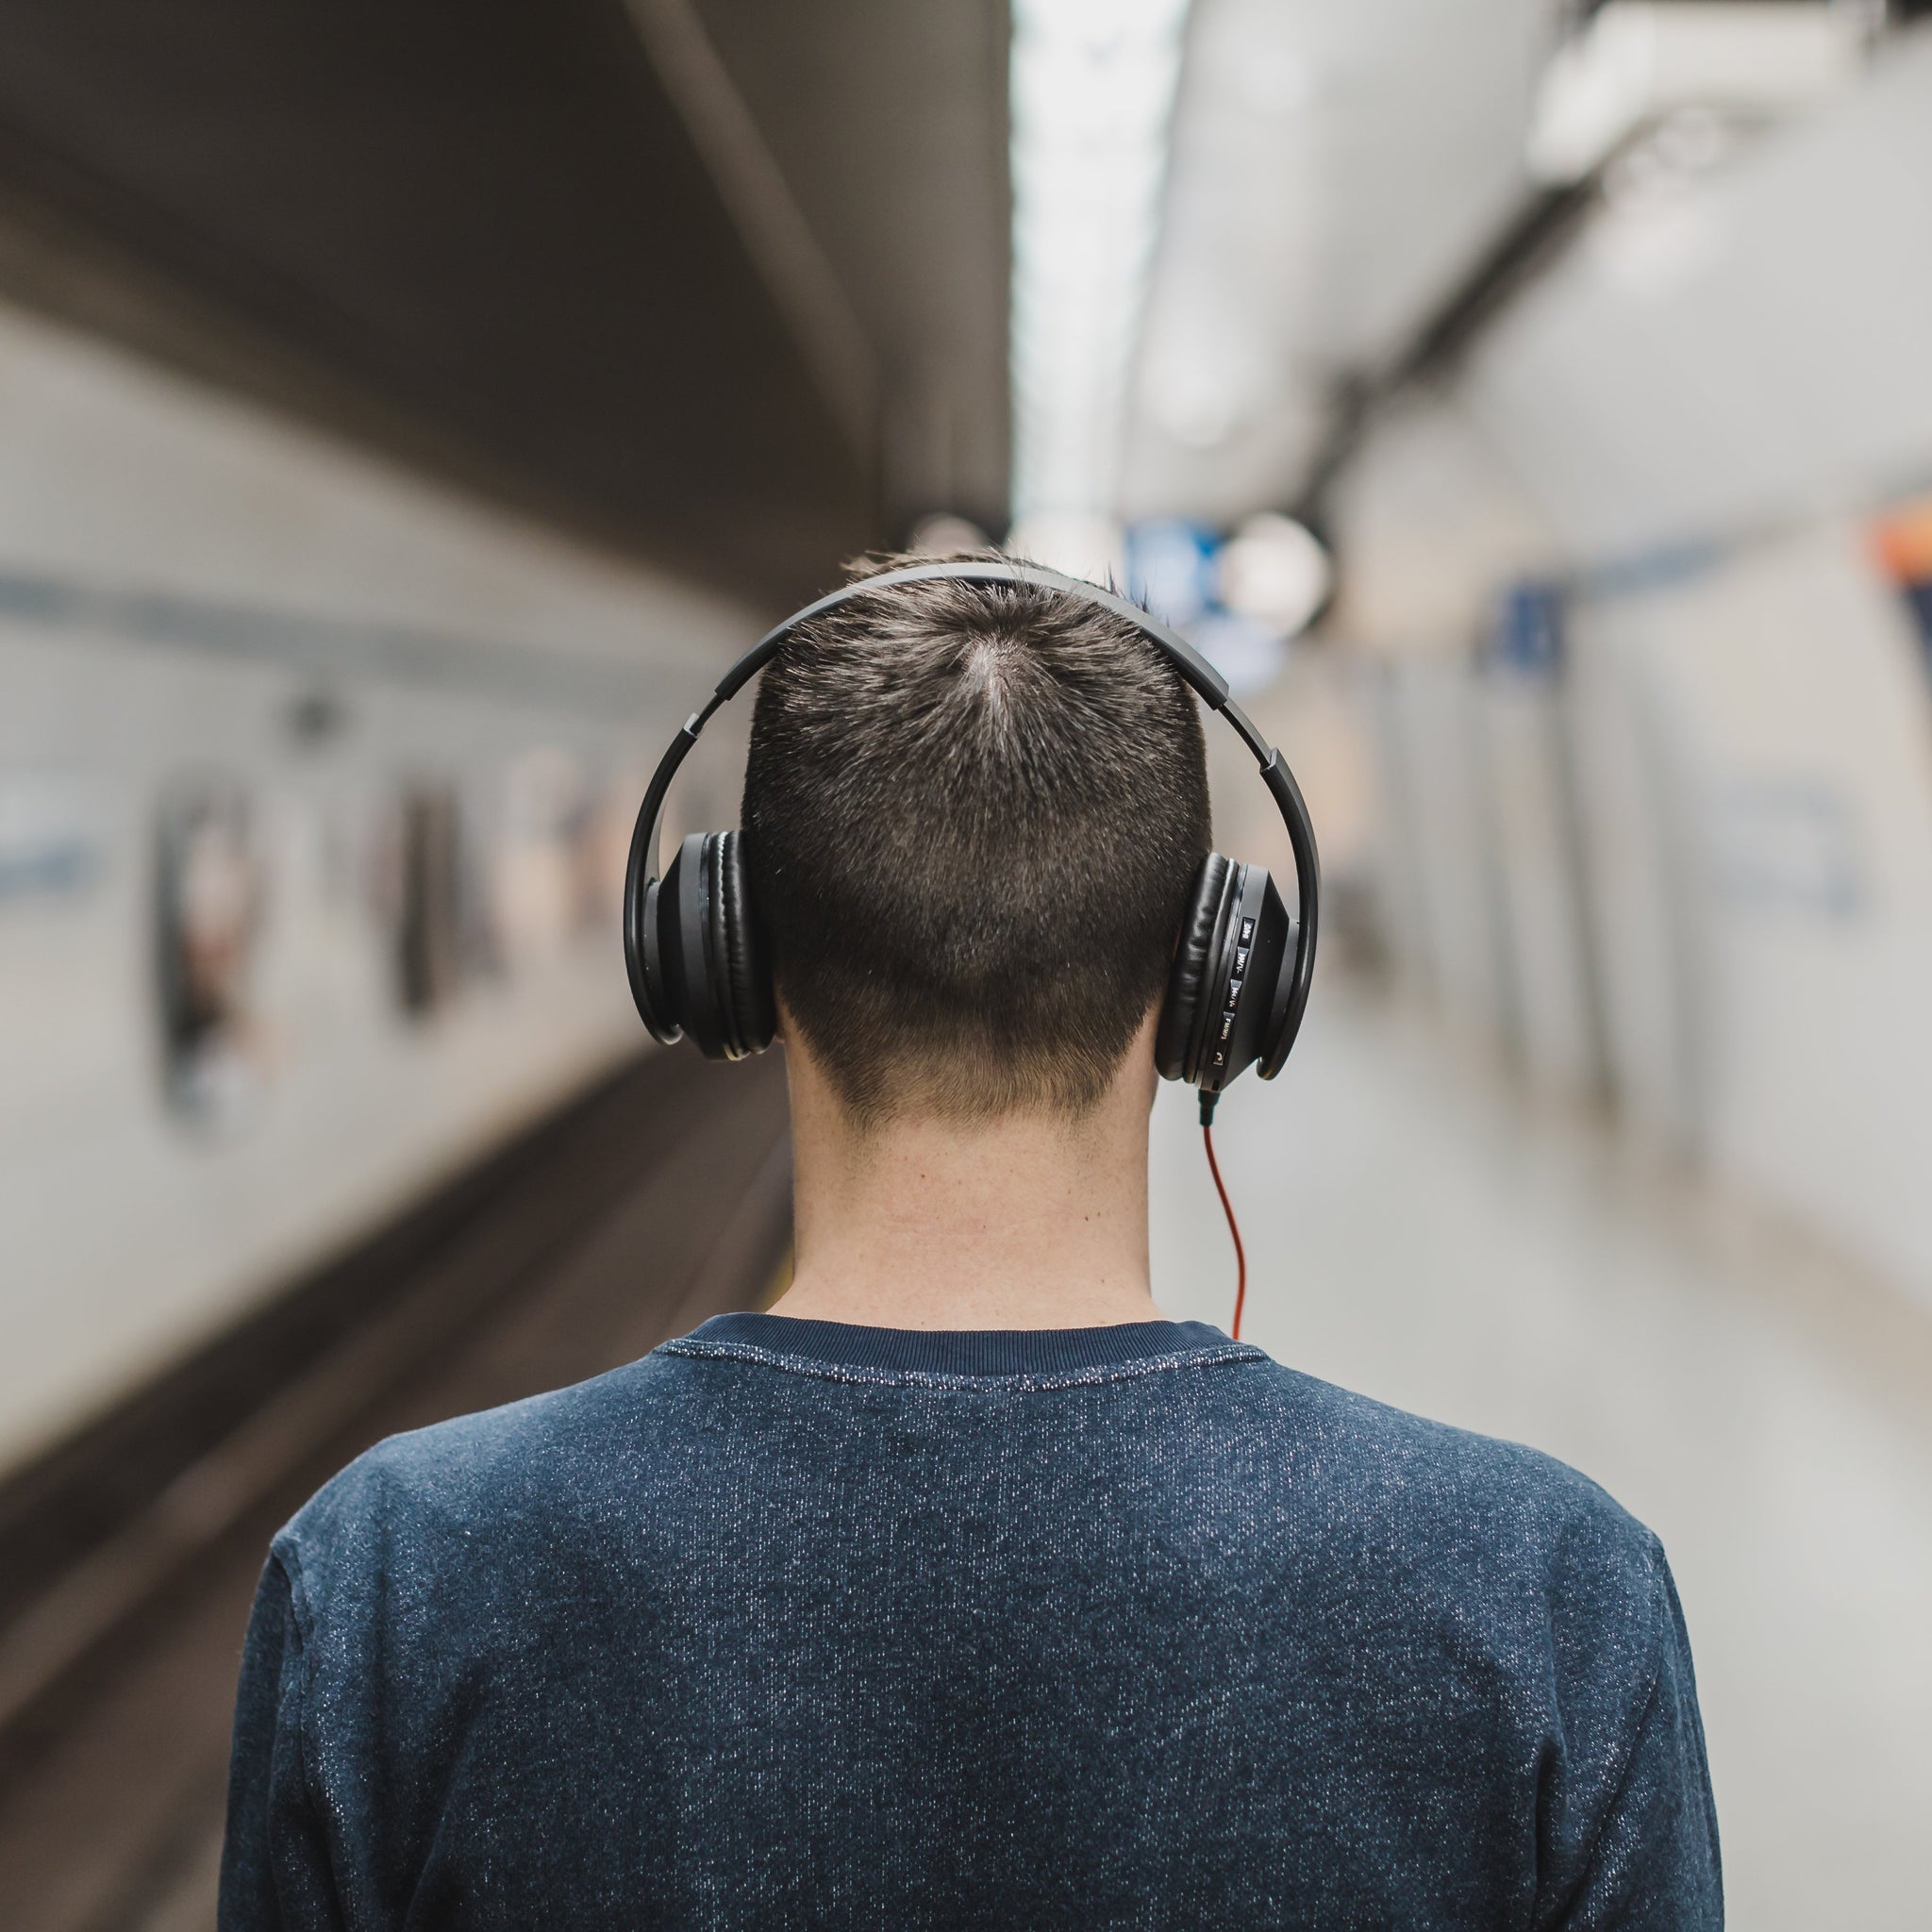 Which Audio Product Is Right For You?